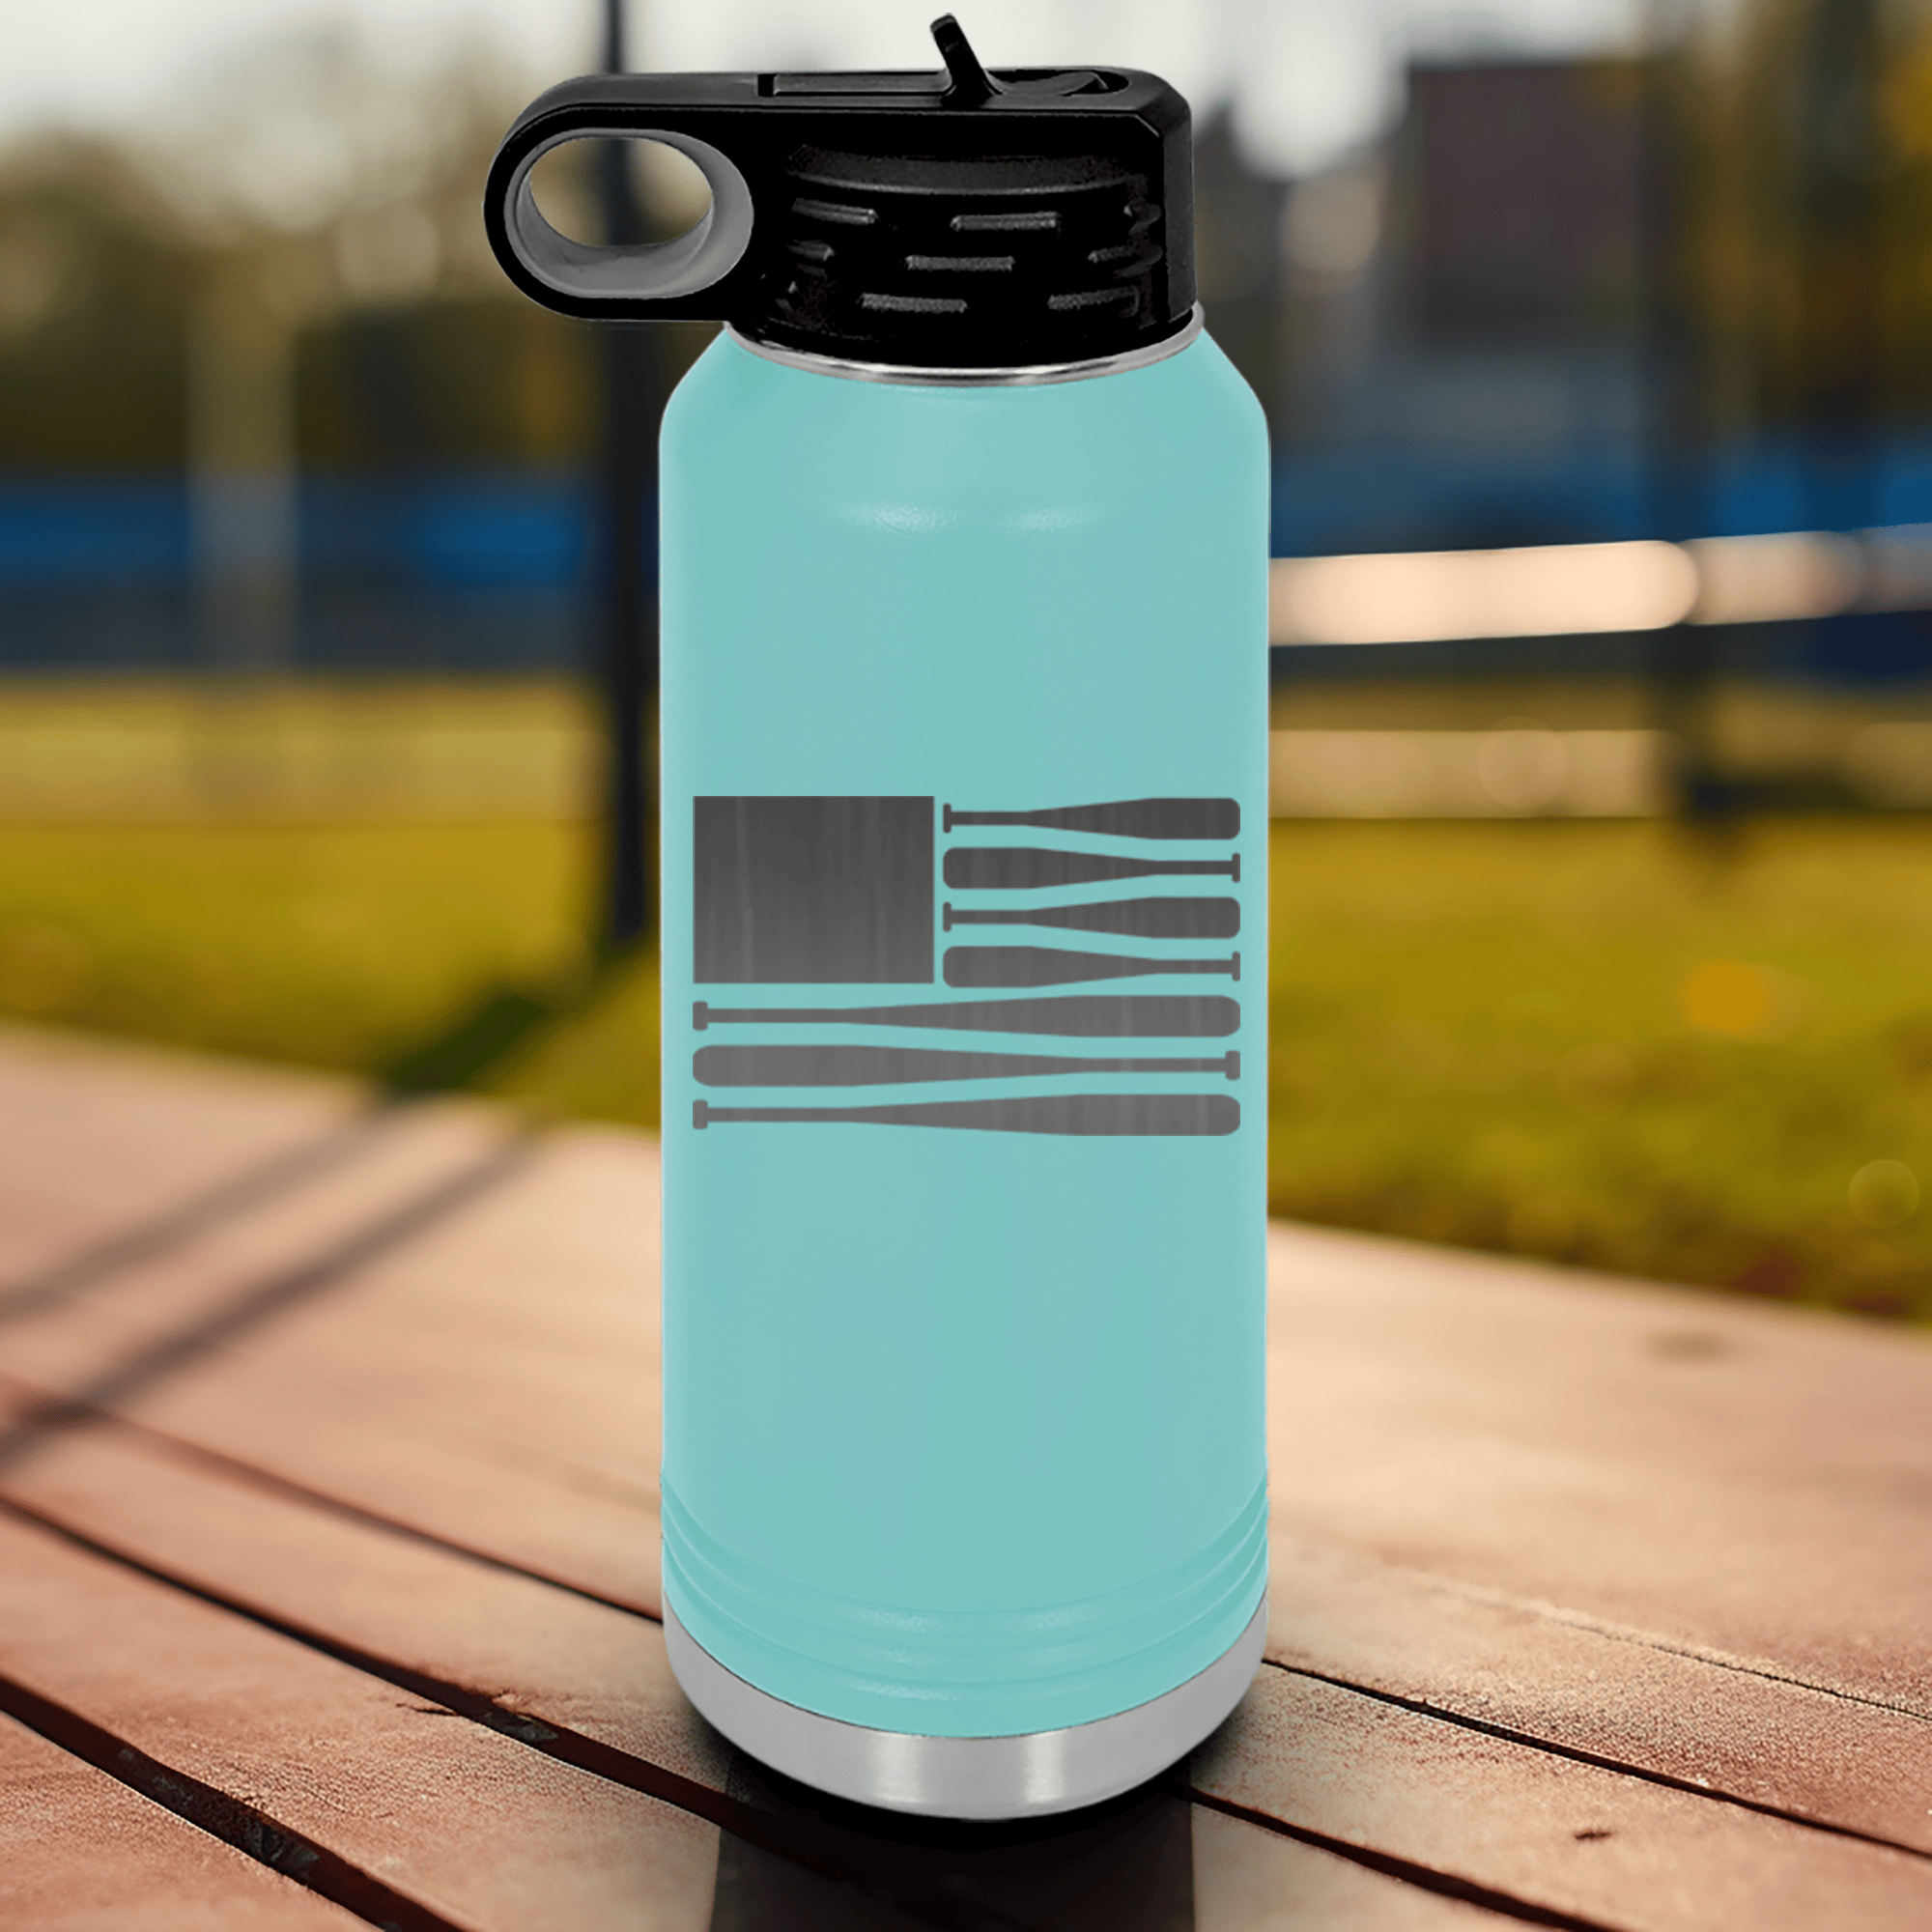 Teal Baseball Water Bottle With Star Spangled Bats Design